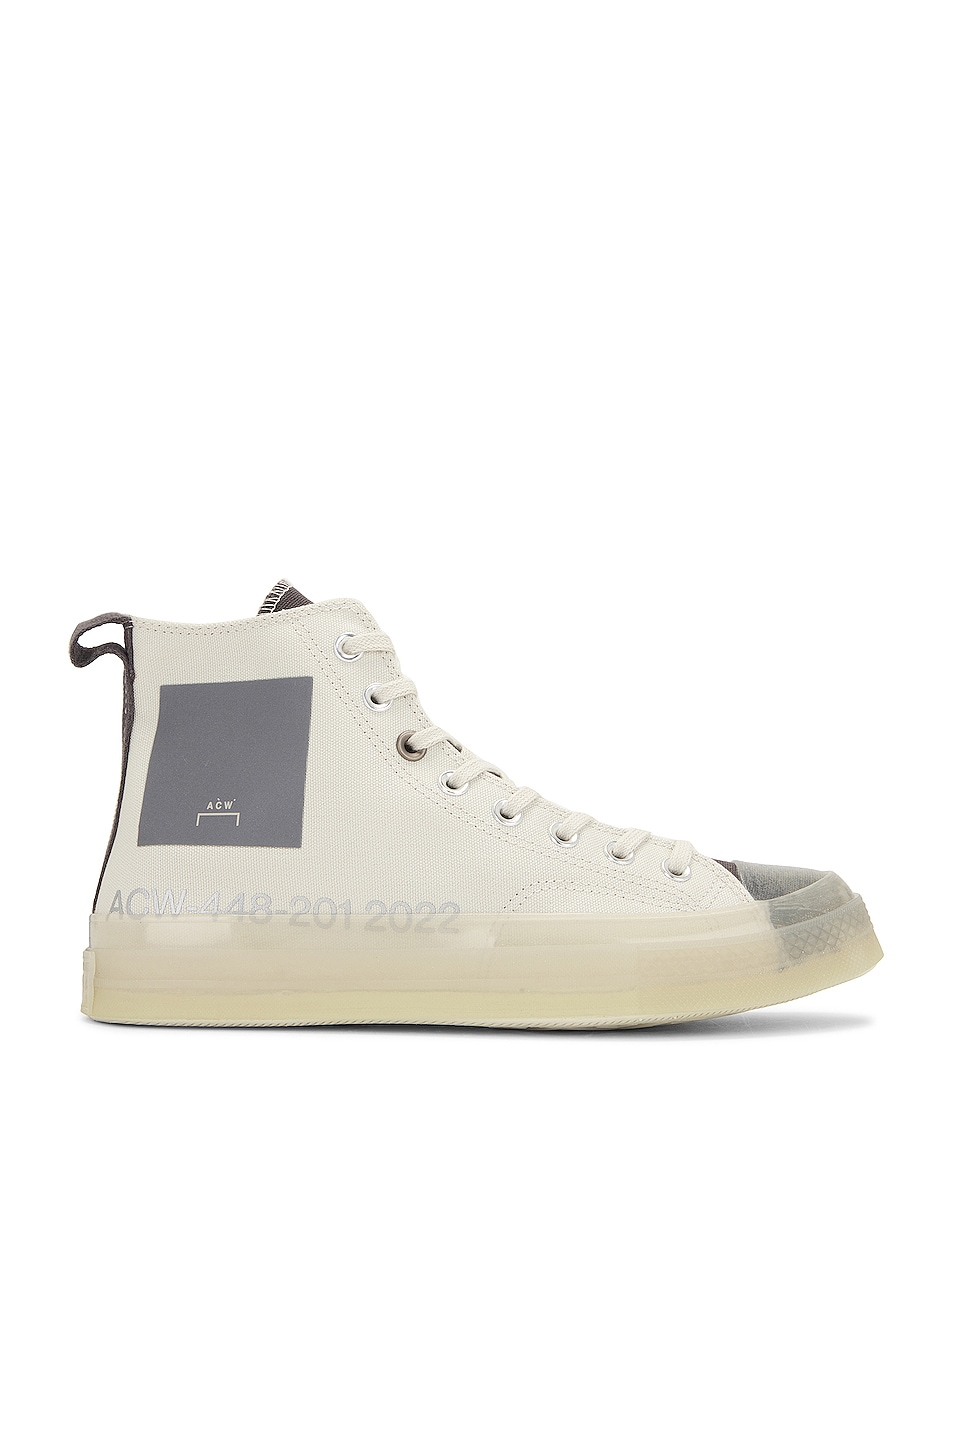 Converse x A-COLD-WALL* Chuck 70 in Pavement, Silver Birch & Steel Grey ...